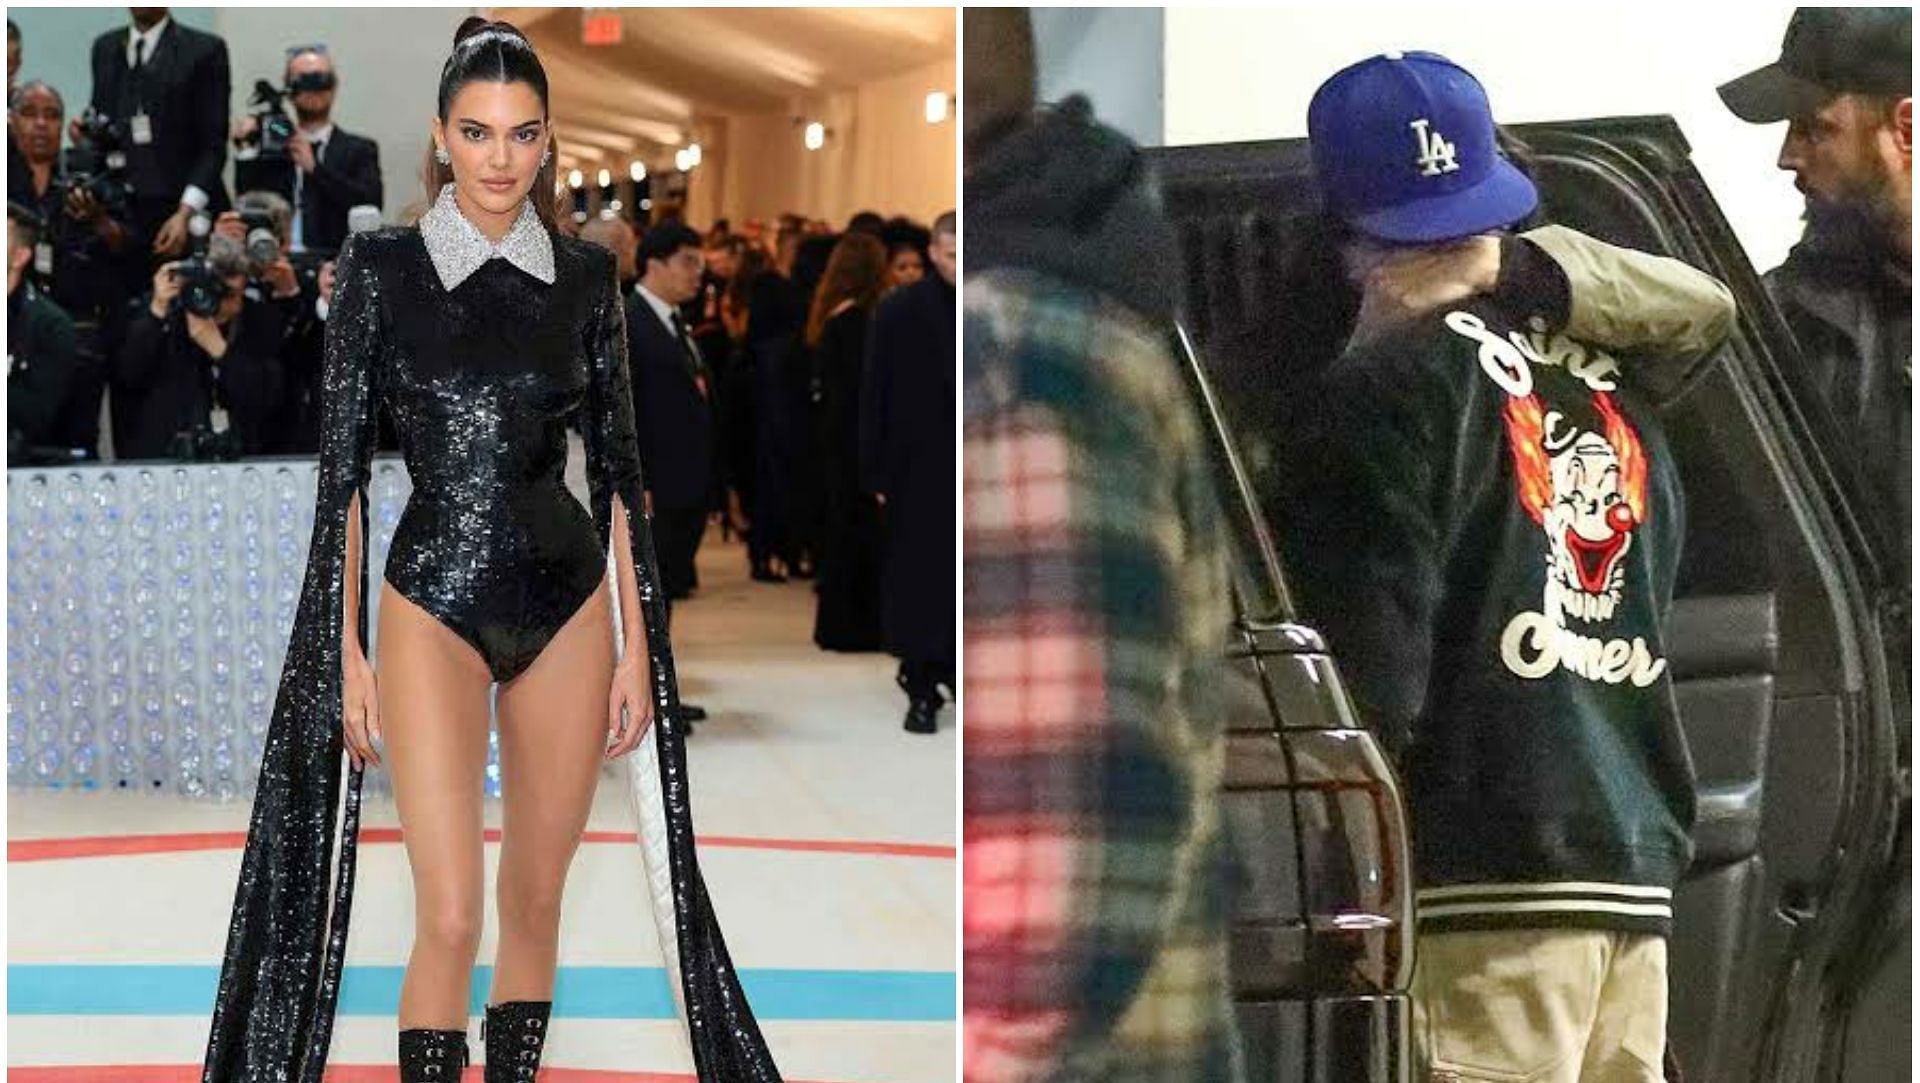 Is Bad Bunny dating Kendall Jenner?